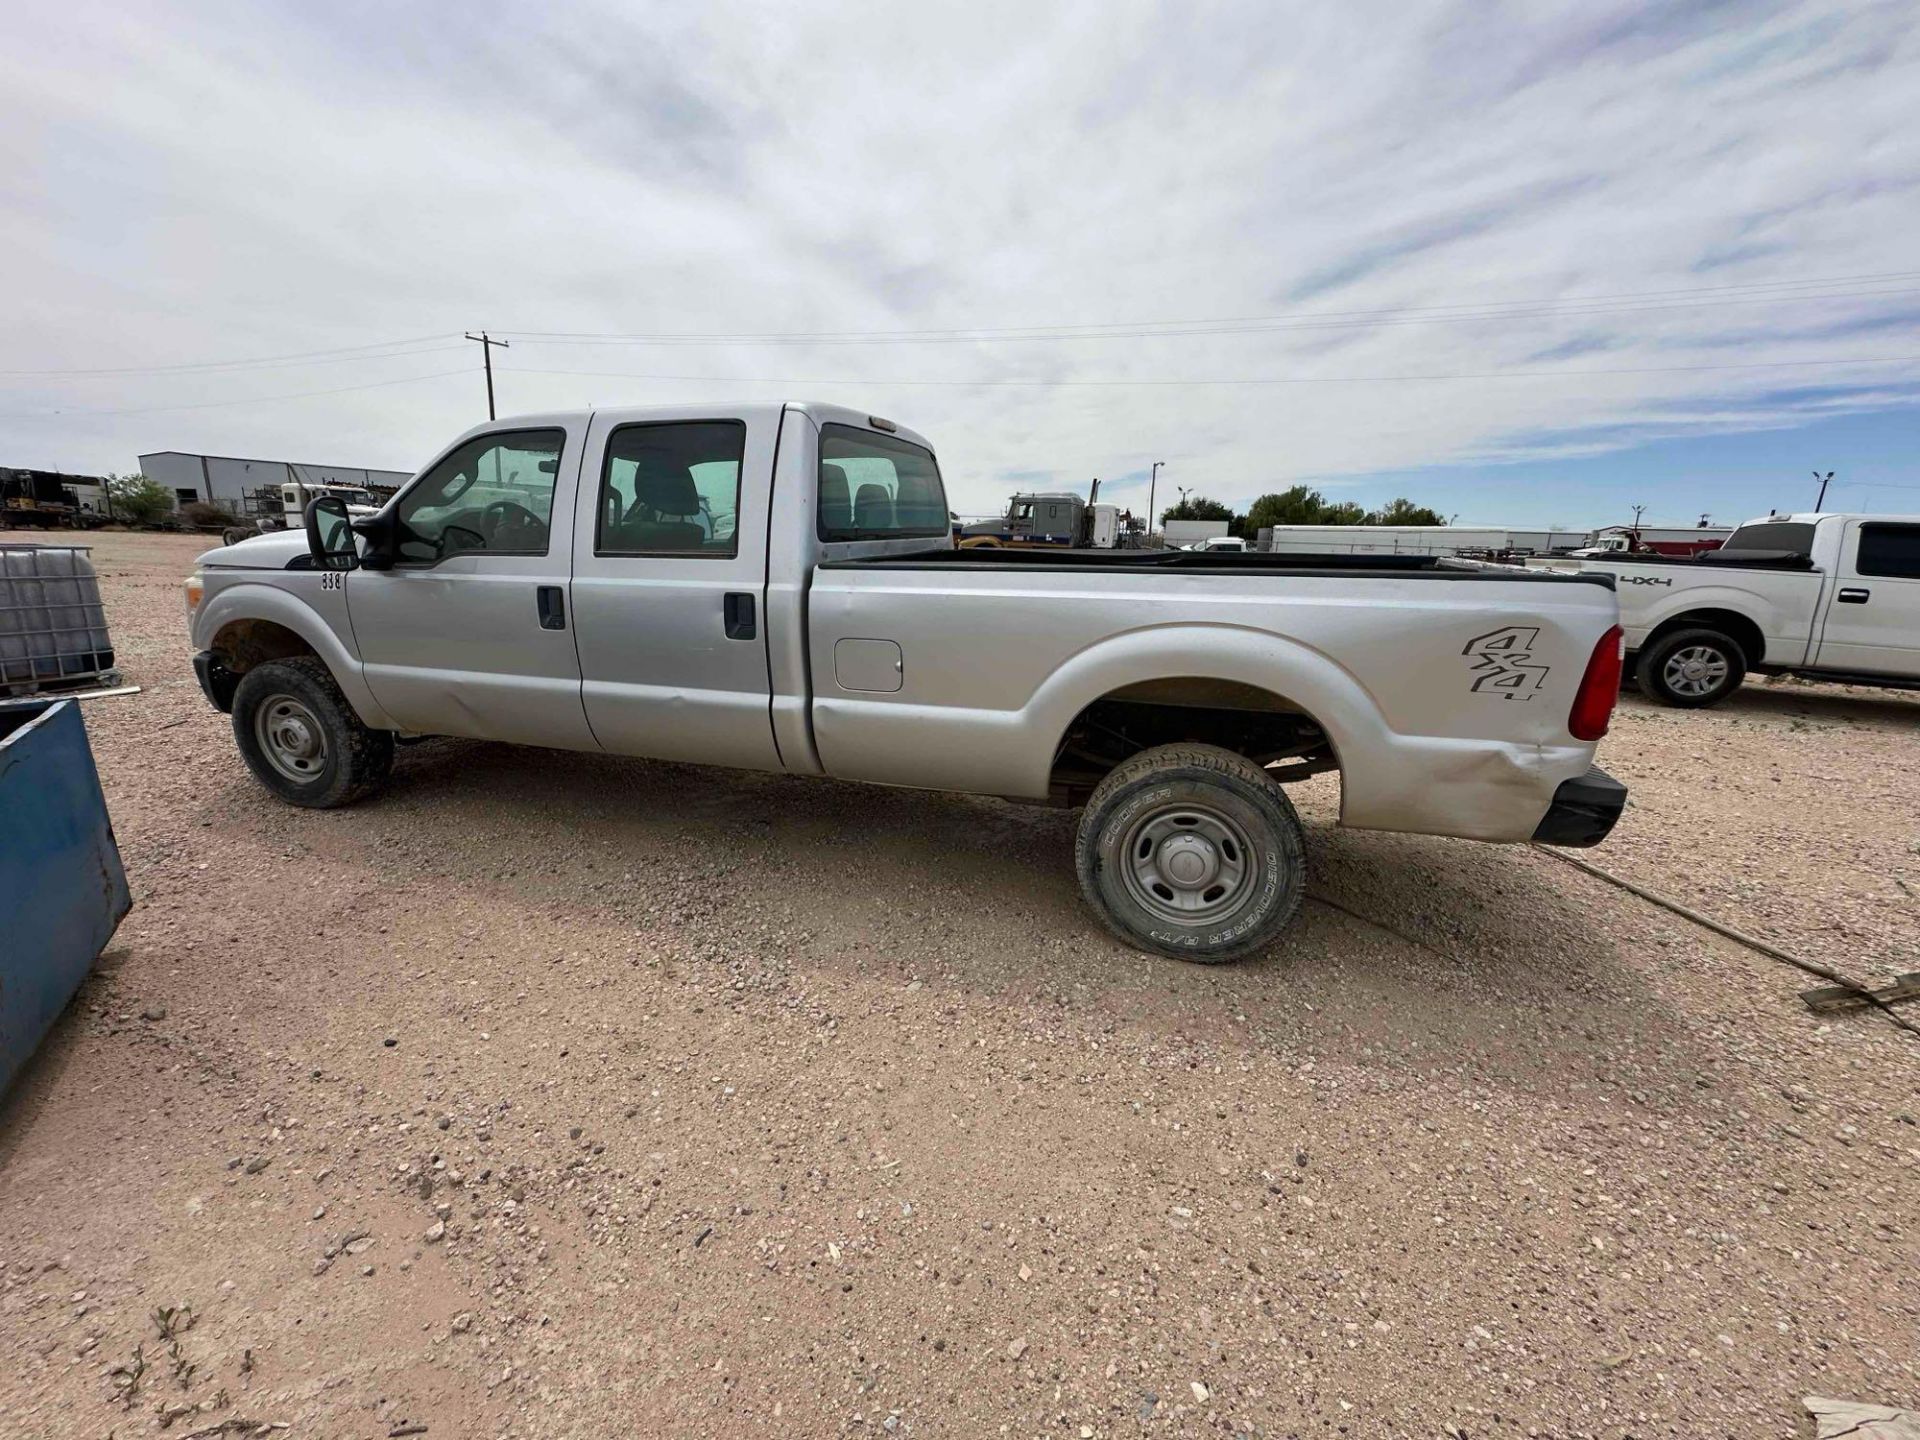 2011 Ford F350 SD Crew Cab Pickup Truck - Image 9 of 20